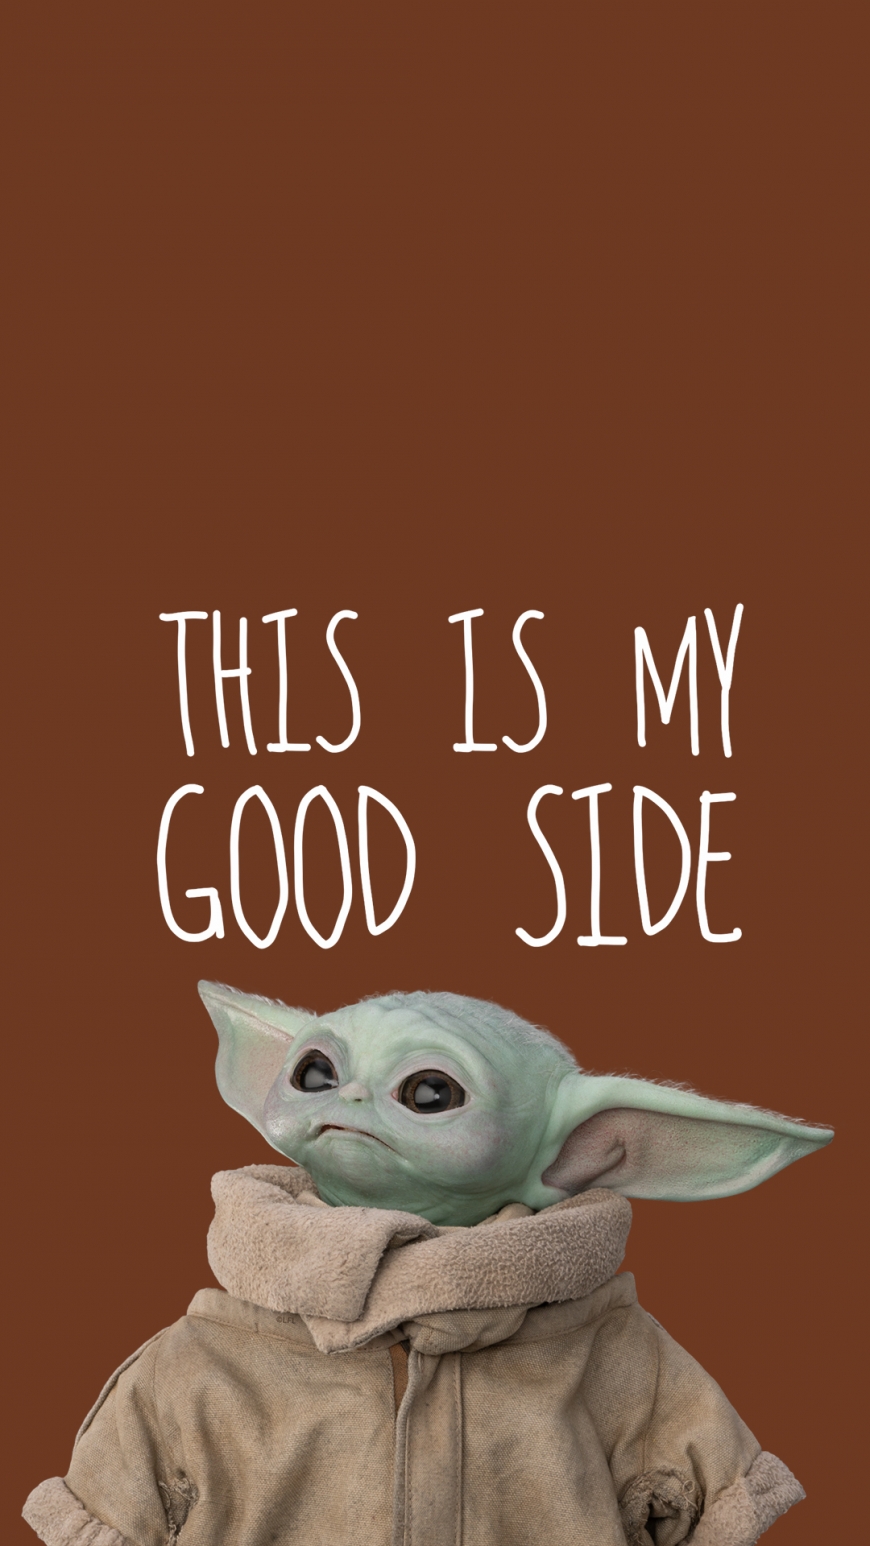 Baby Yoda This is my good side wallpaper